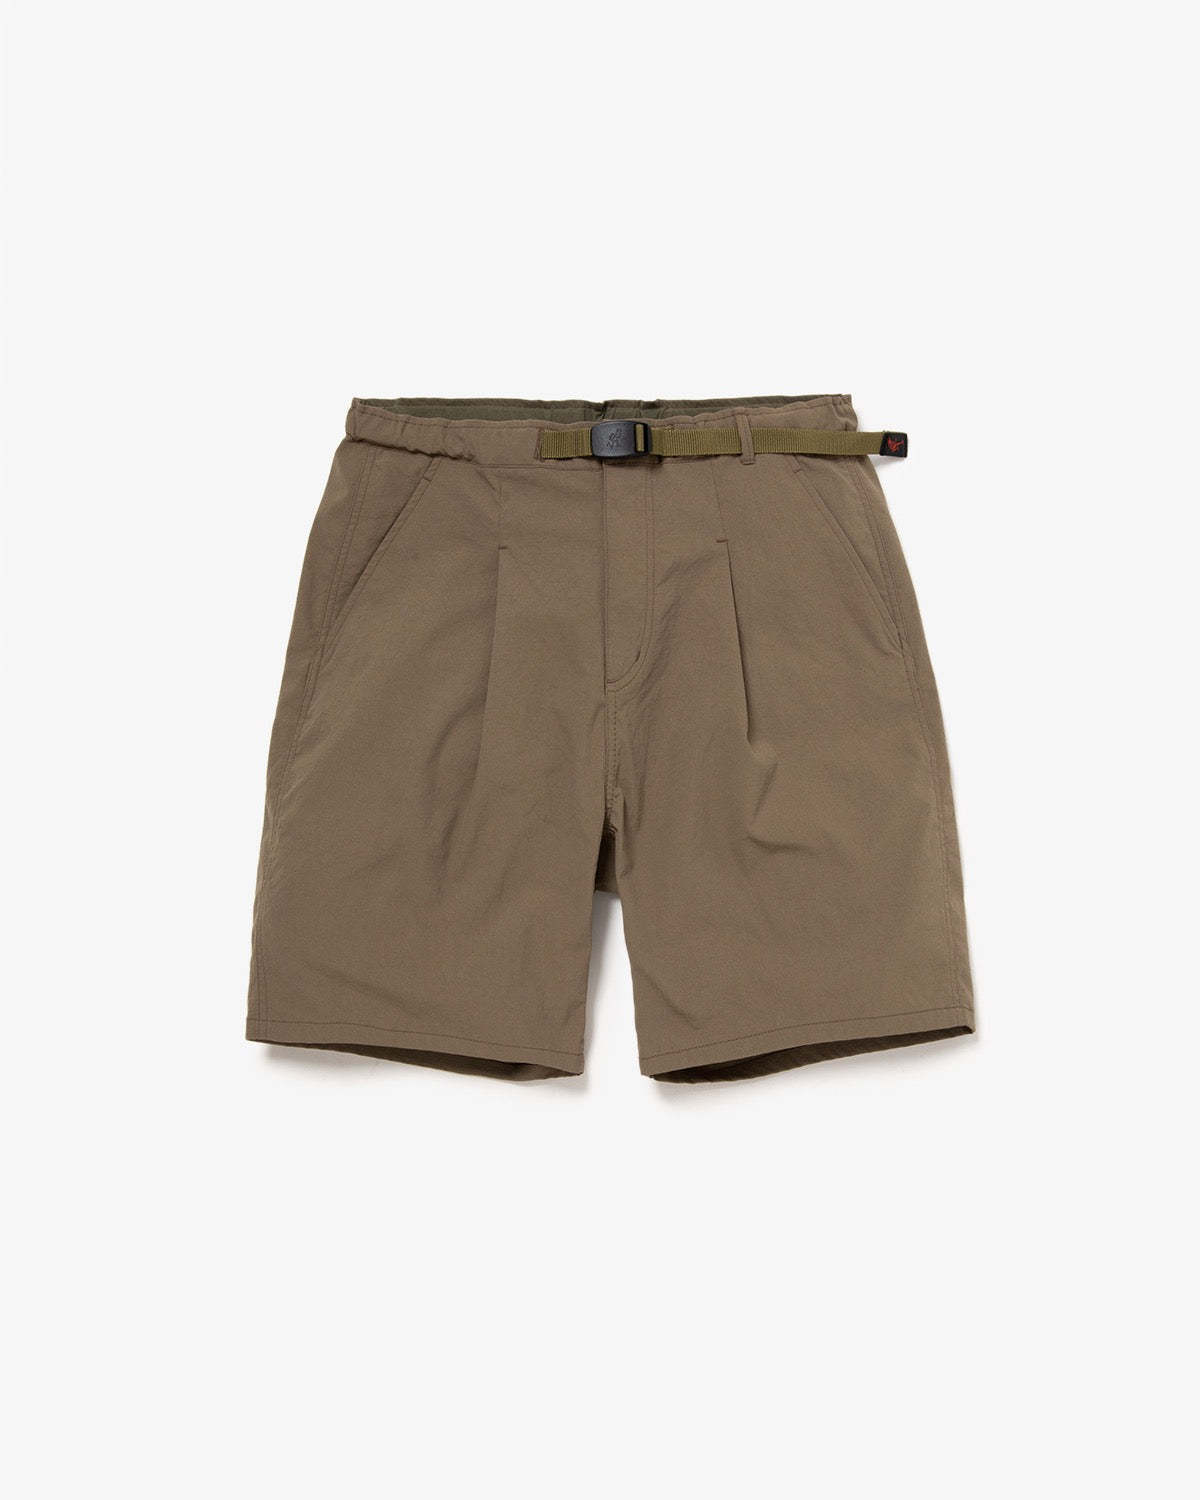 WALKER EASY SHORTS POLY RIPSTOP STRETCH by GRAMICCI